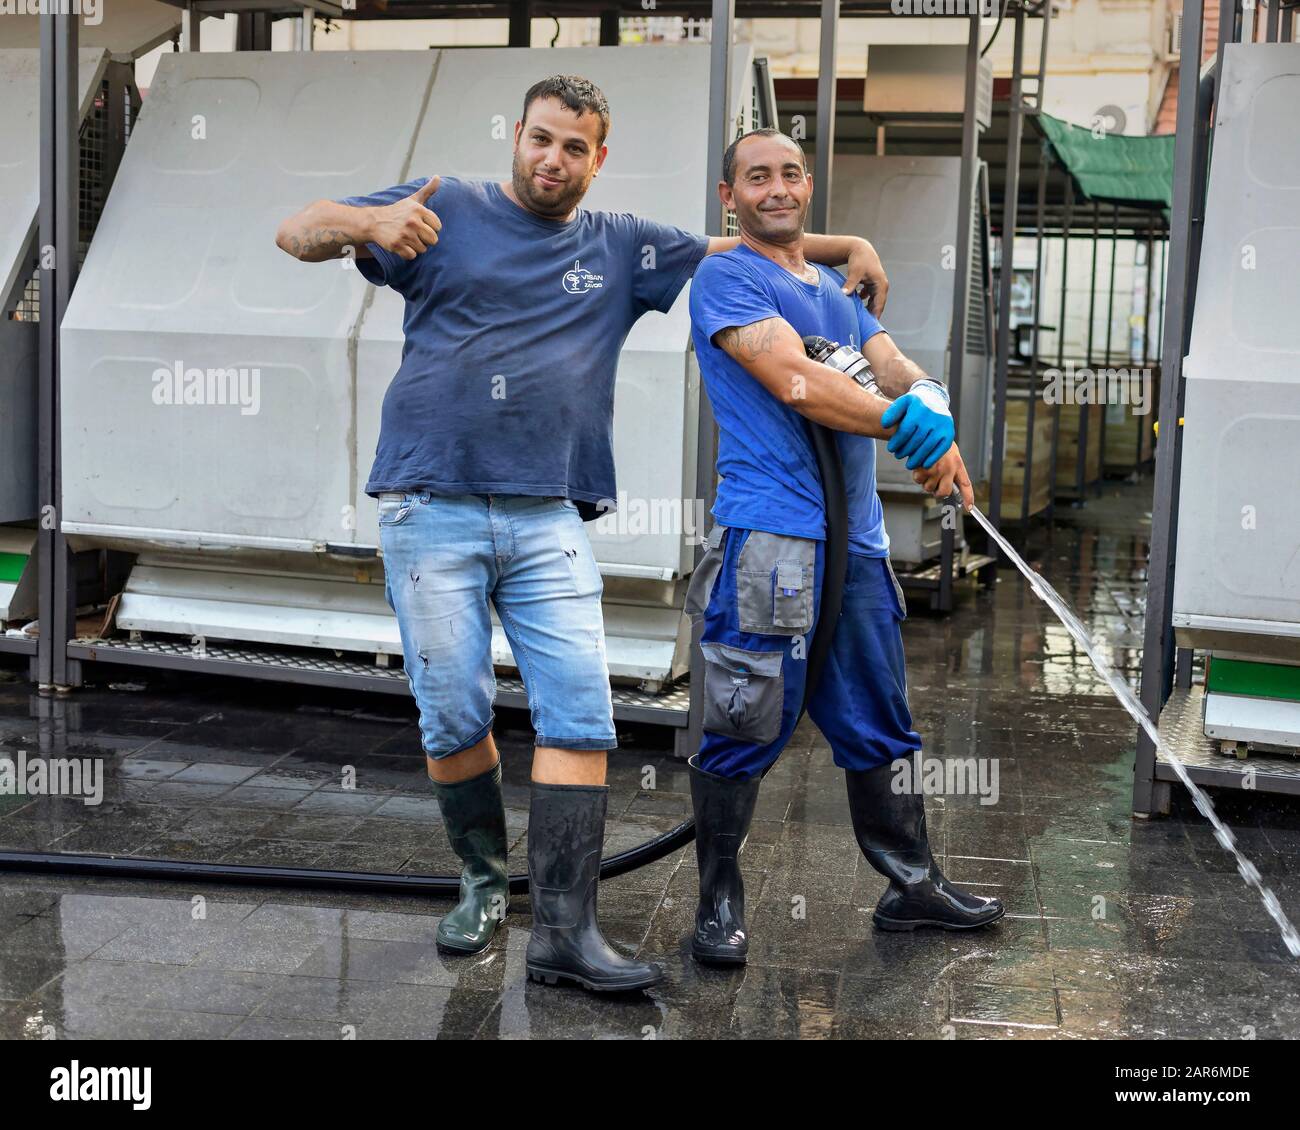 Belgrade, Serbia, Sep 5, 2019: Two workers posing while washing green market floor at the end of the work day Stock Photo